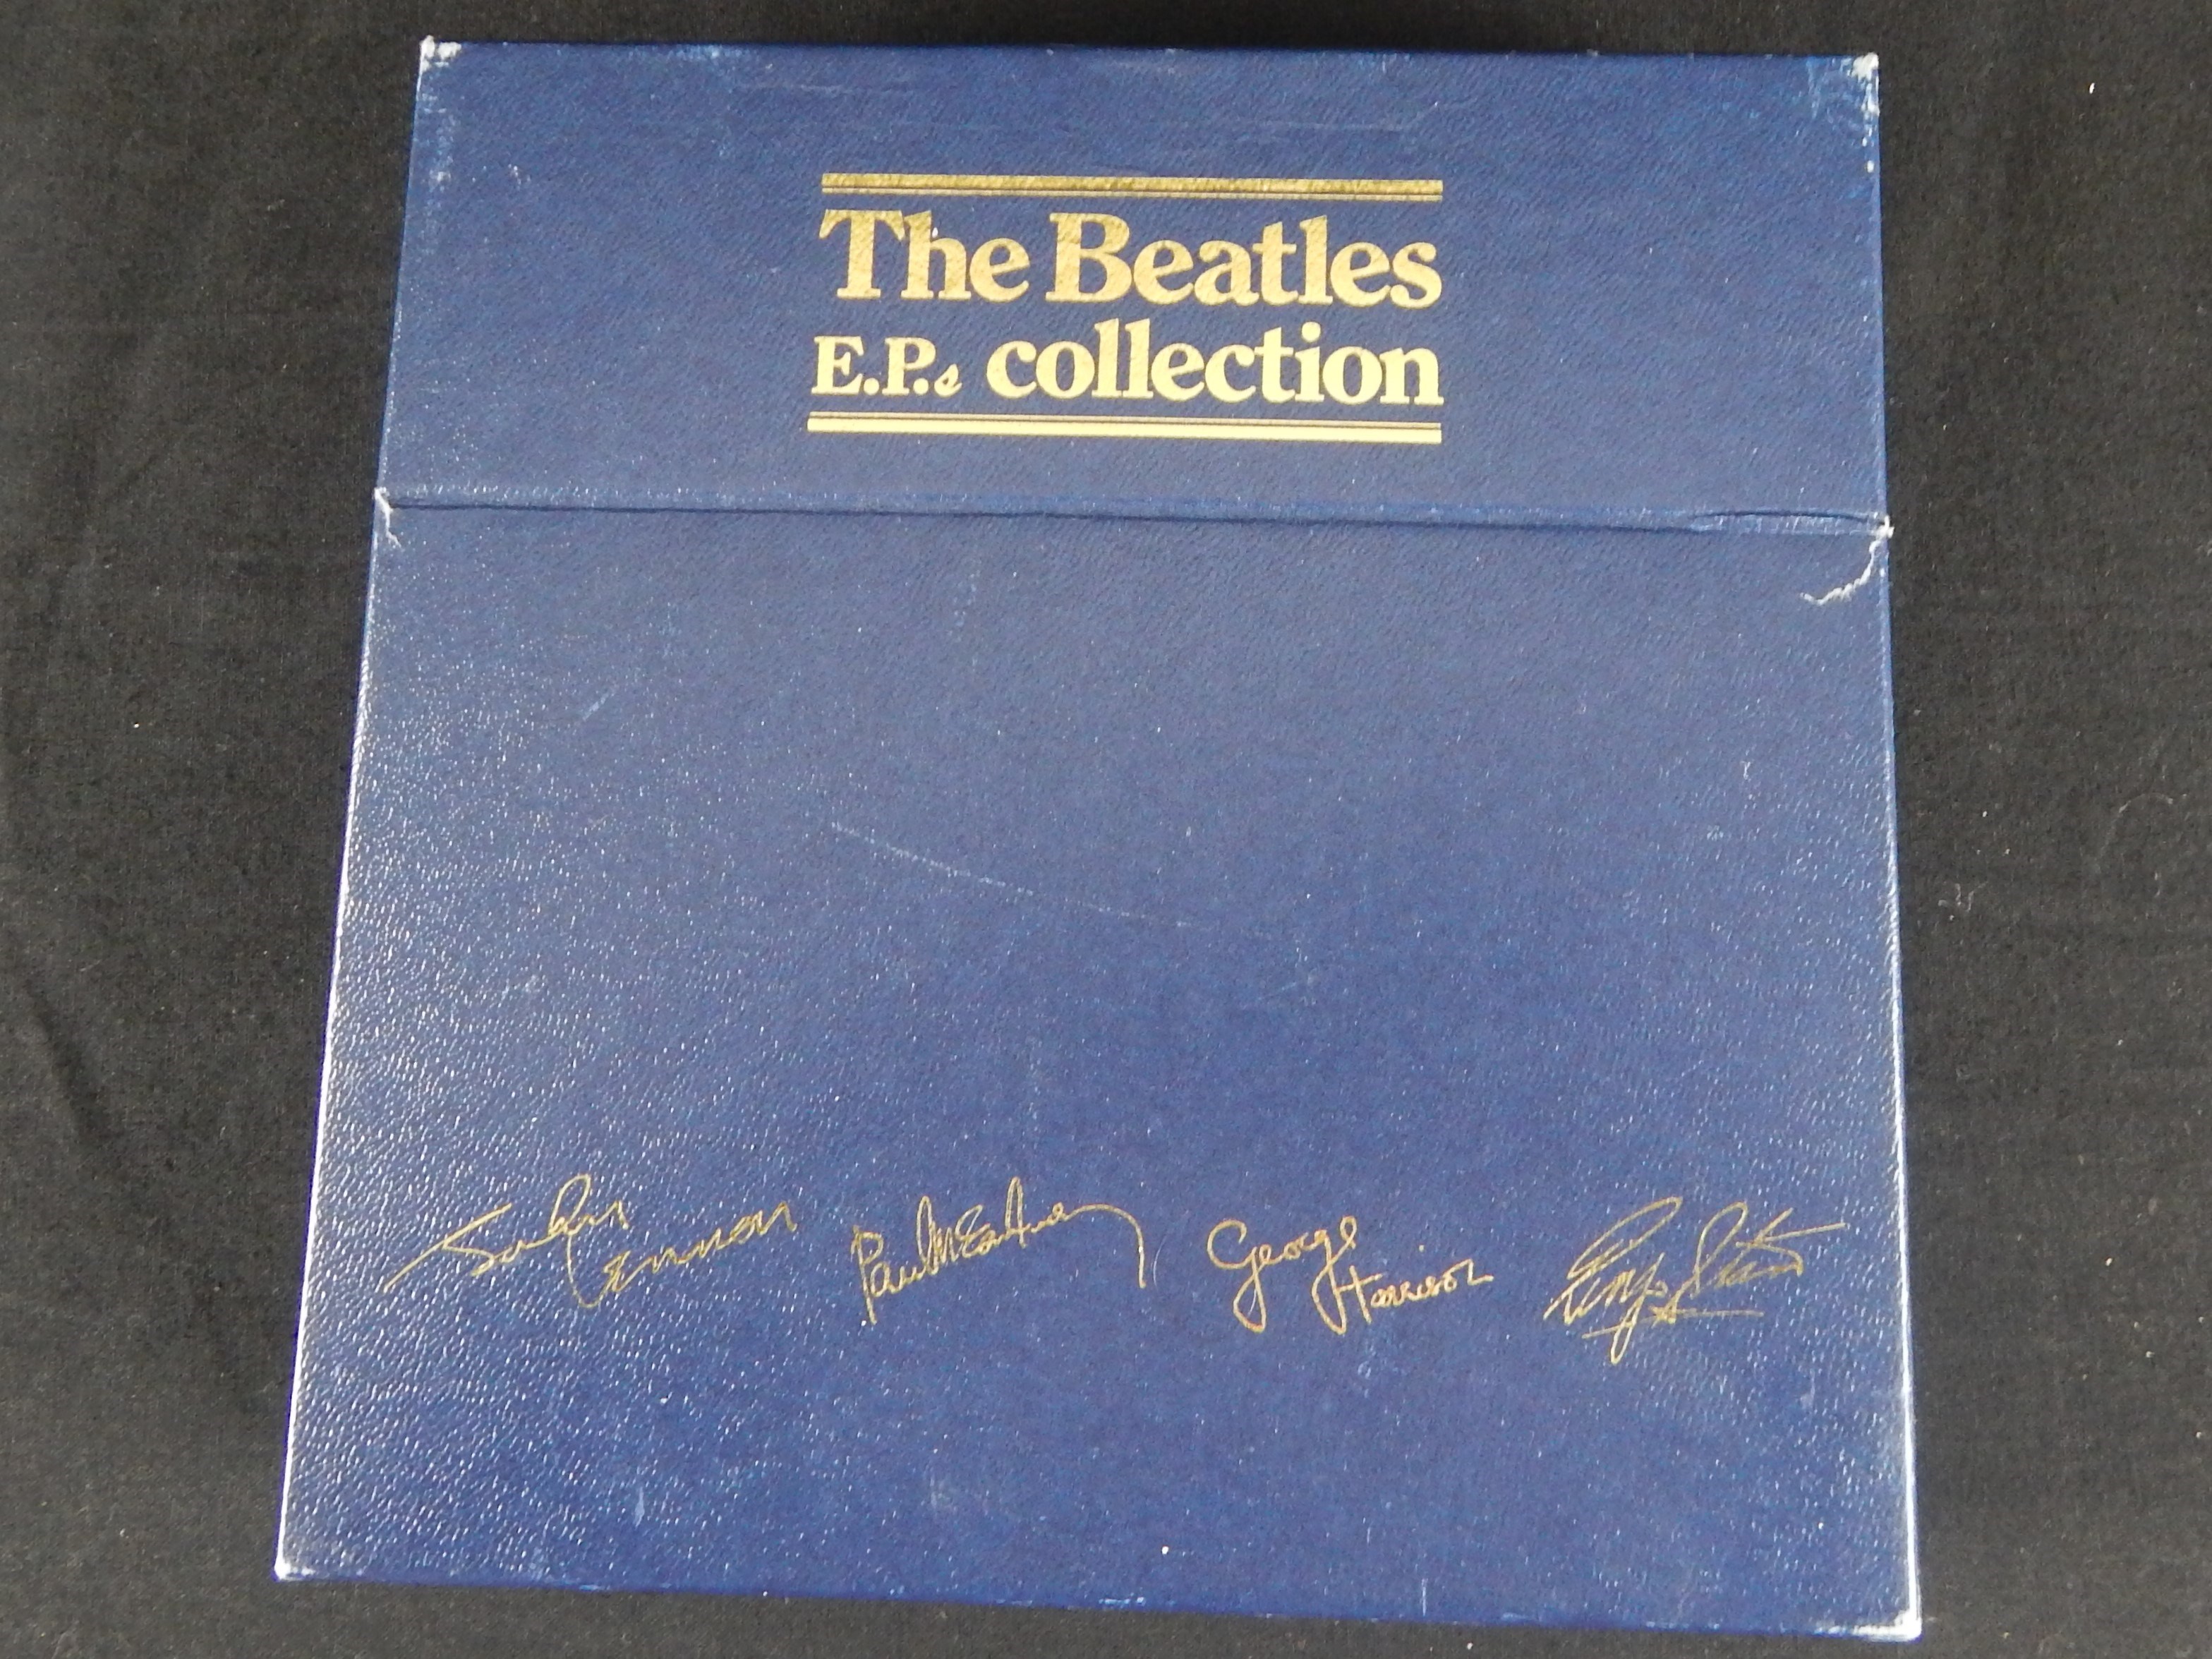 - 1981 The Beatles EP Collection Complete Set in Original Box (UK Release)